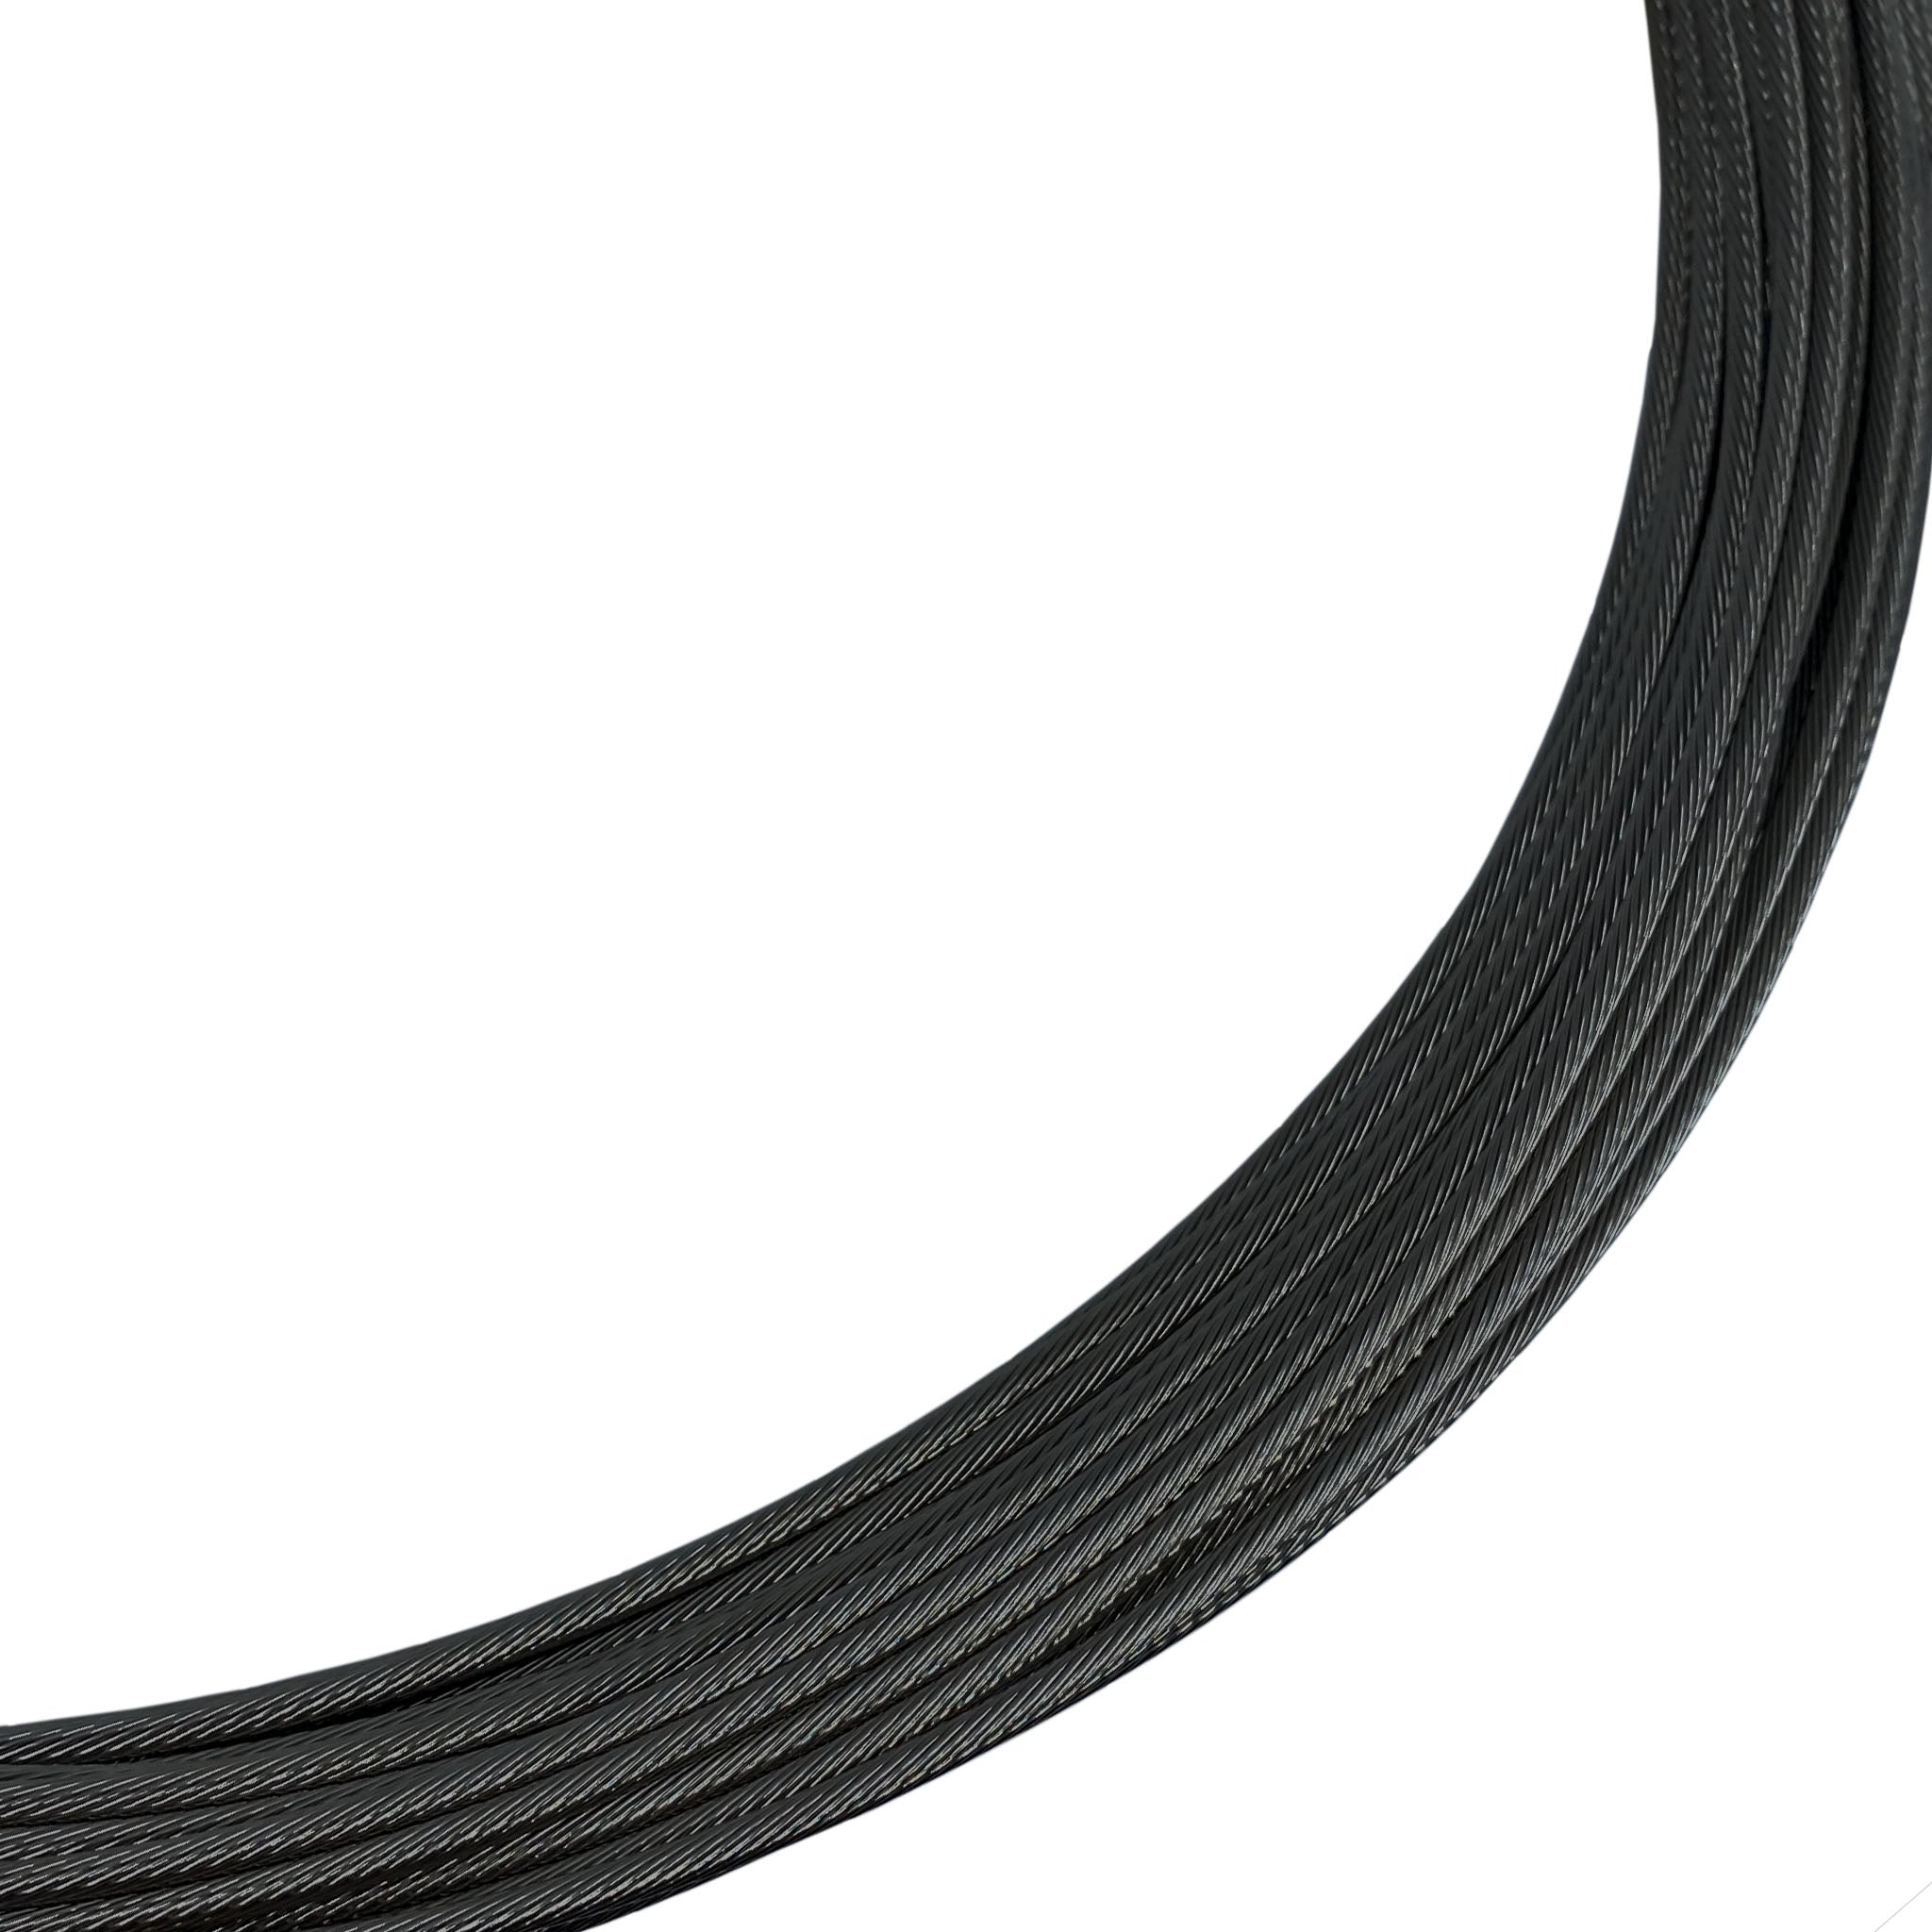 Black Stainless Cable Bundles - For Cable Railing Horizontal or